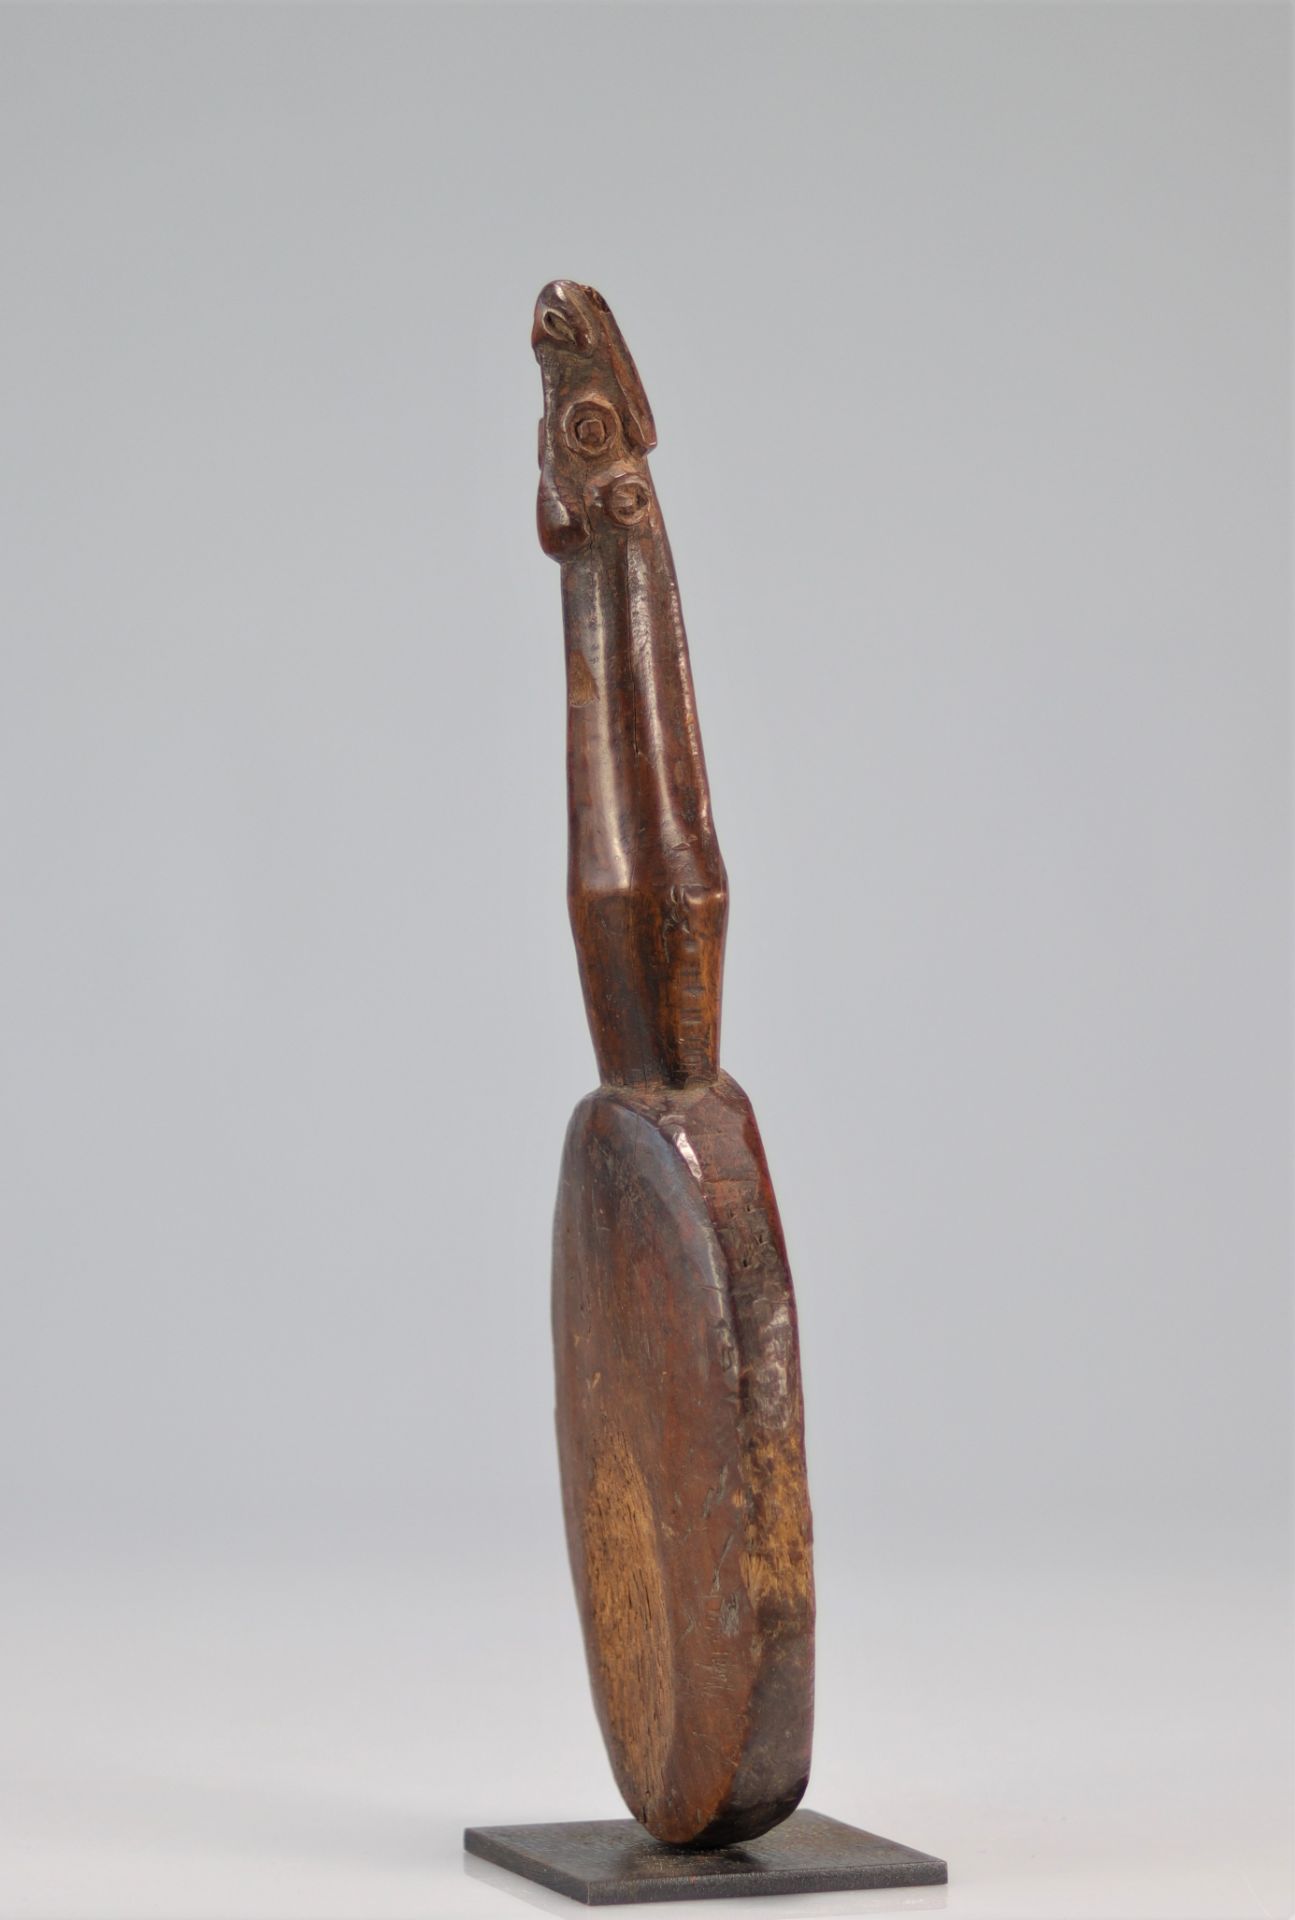 Oceania object carved with a head - Image 3 of 3